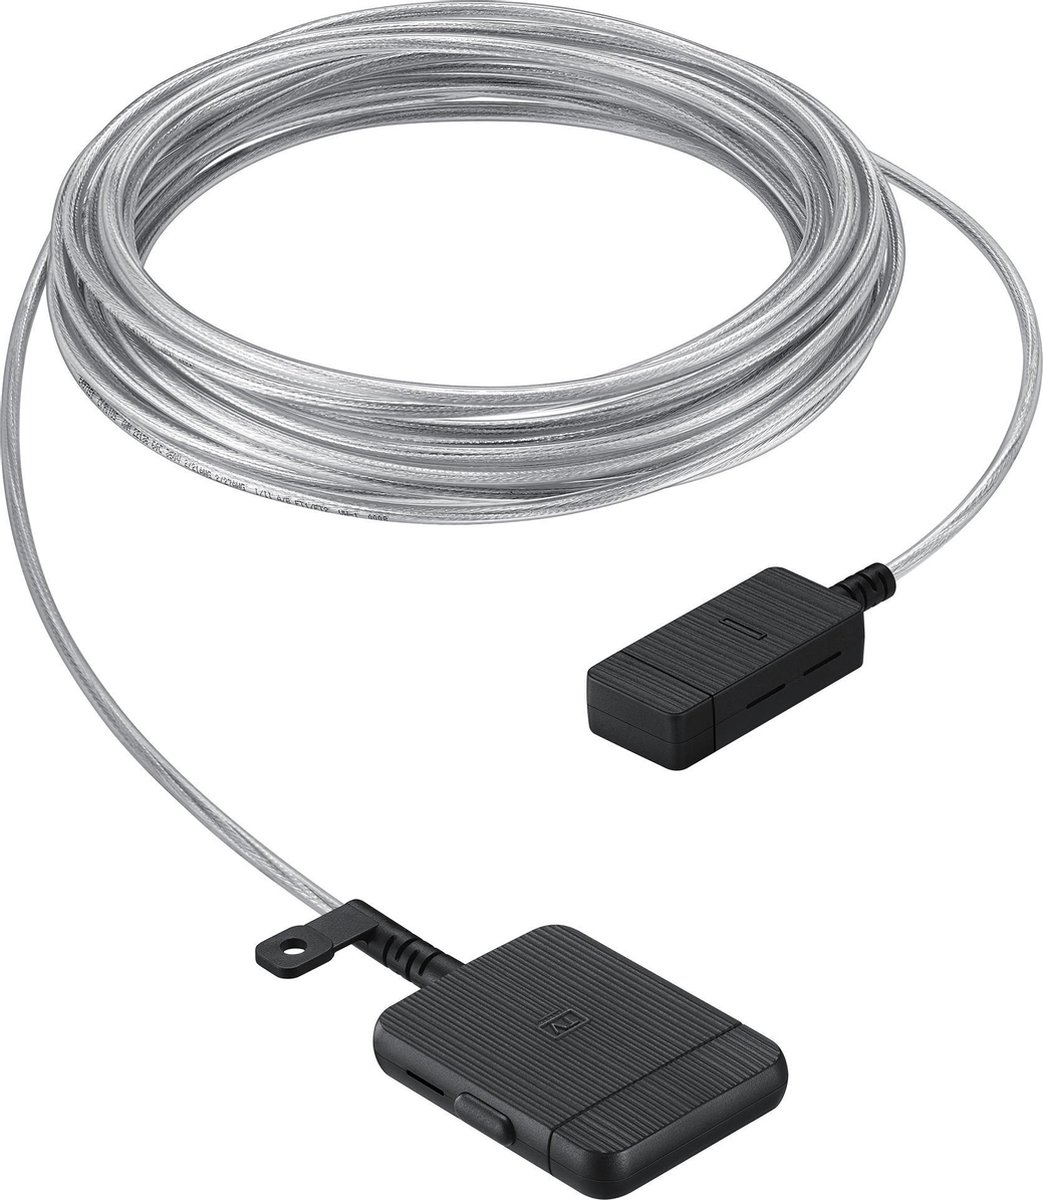 Samsung One Invisible cable VG-SOCR15 - Zwart